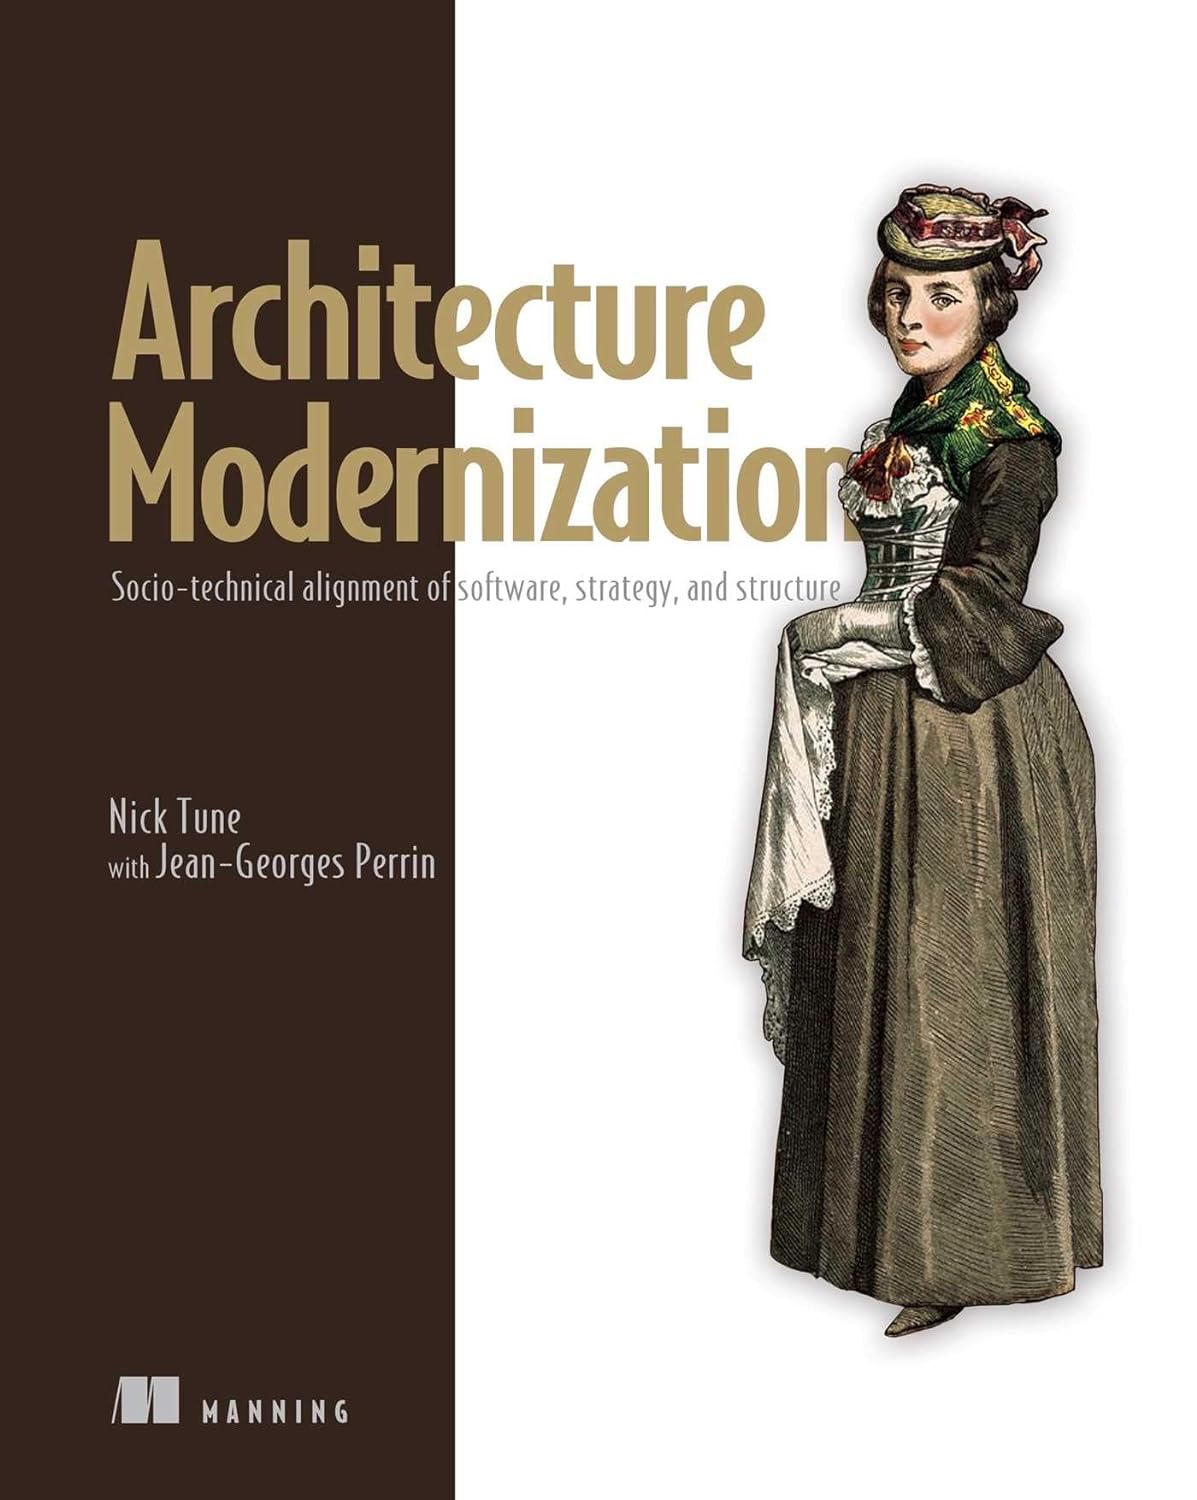 Architecture Modernization: Socio-technical alignment of software, strategy, and structure by Nick Tune with Jean-Georges Perrin.